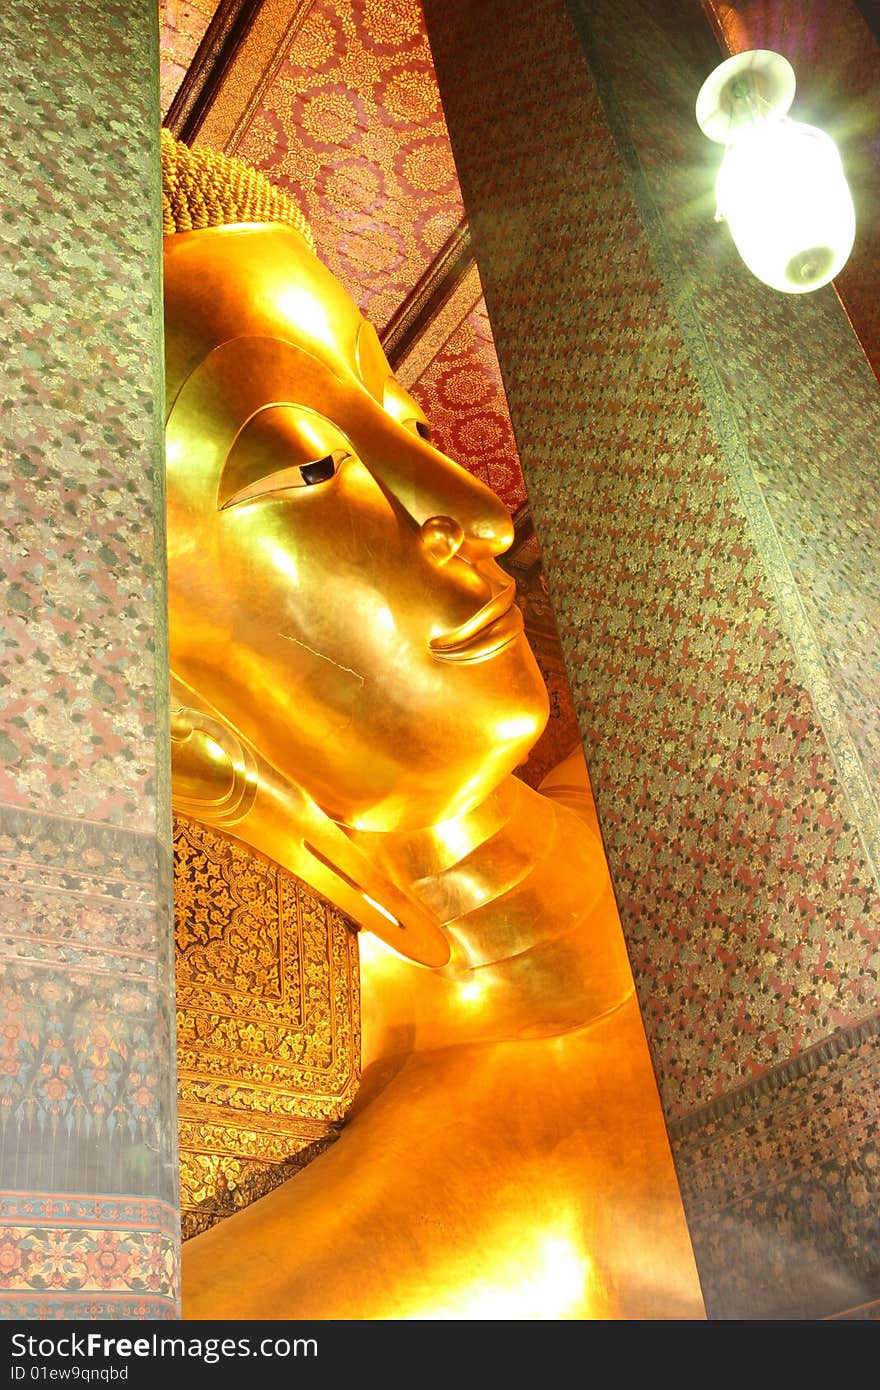 One of the most famous Buddha image in Thailand. The reclining Buddha of Wat Pho, Bangkok, Thailand. One of the most famous Buddha image in Thailand. The reclining Buddha of Wat Pho, Bangkok, Thailand.